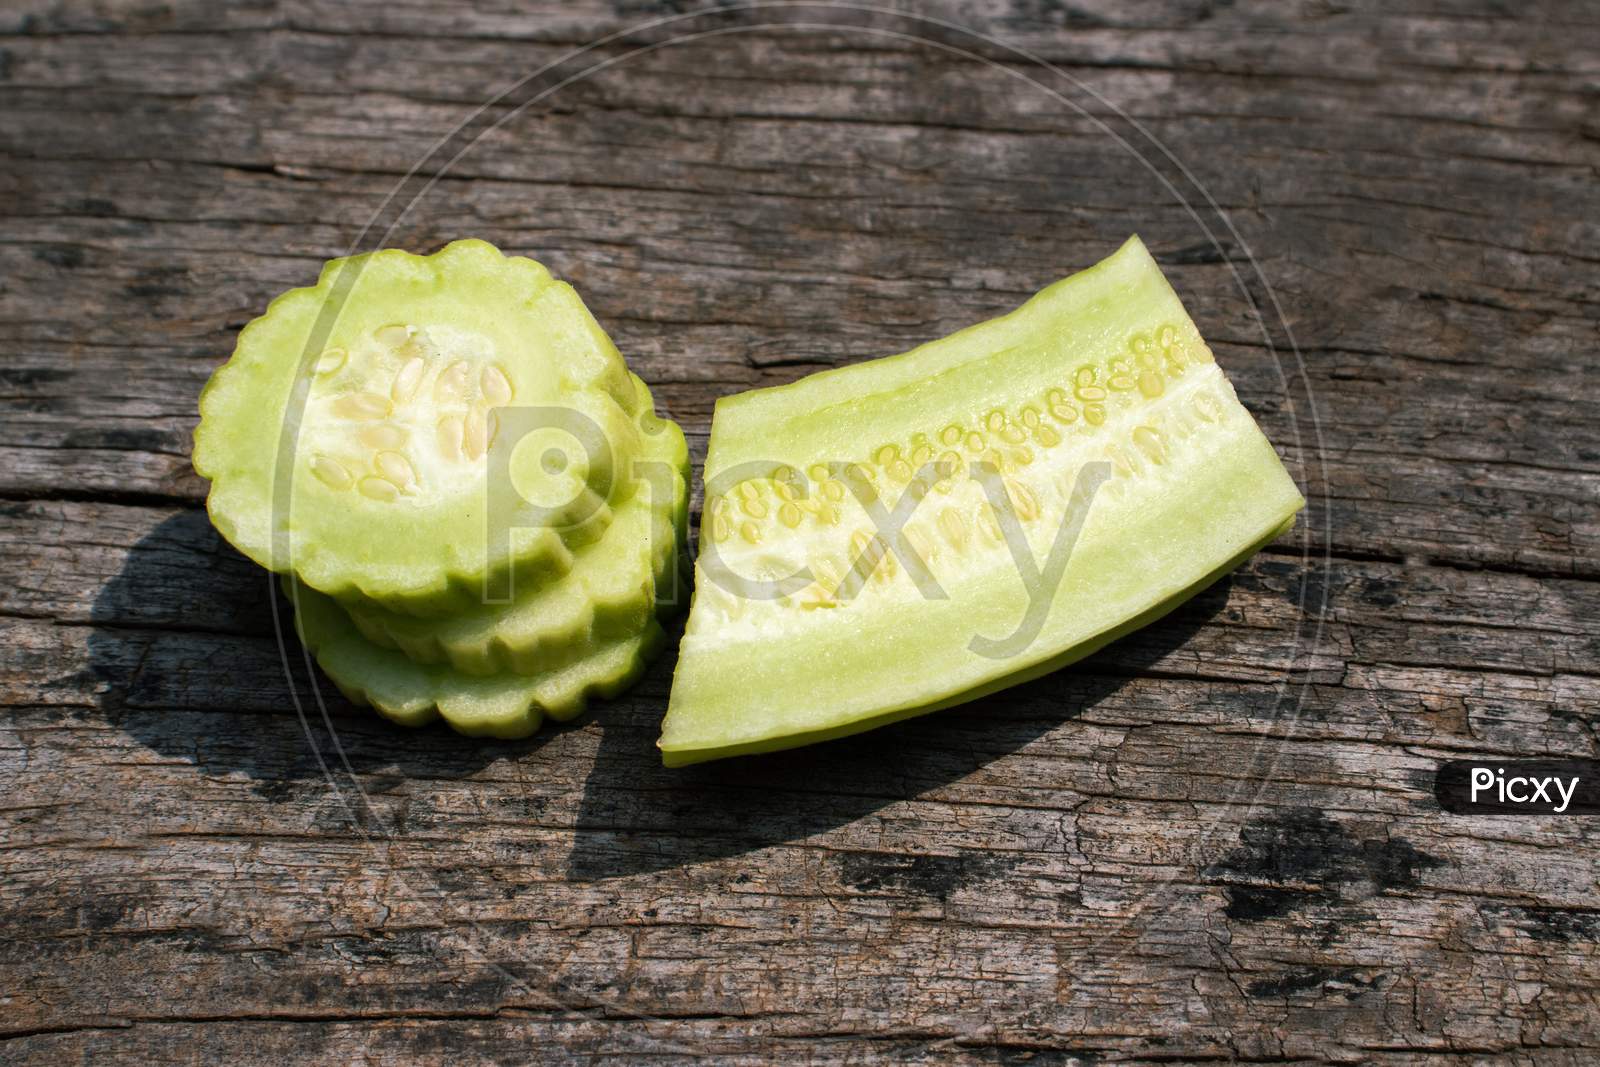 Armenian Cucumber Cuts Or Yard Long Cucumber Slices Isolated On Wooden Background, Also Known As Kakri